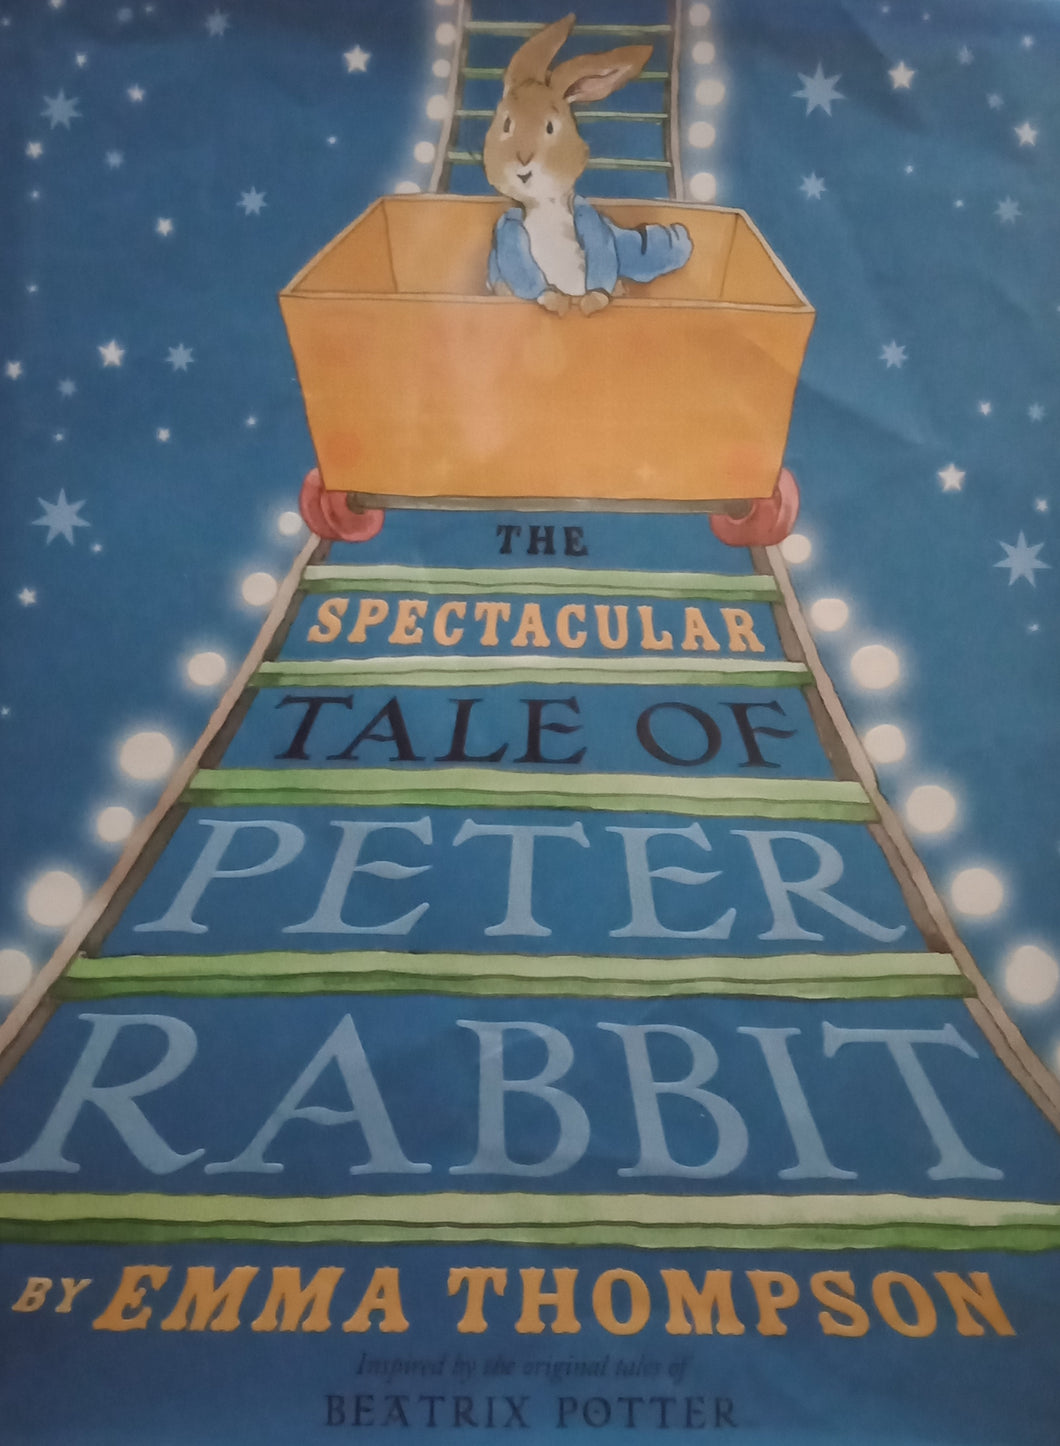 The Spectacular Tale Of Peter Rabbit by Emma Thompson